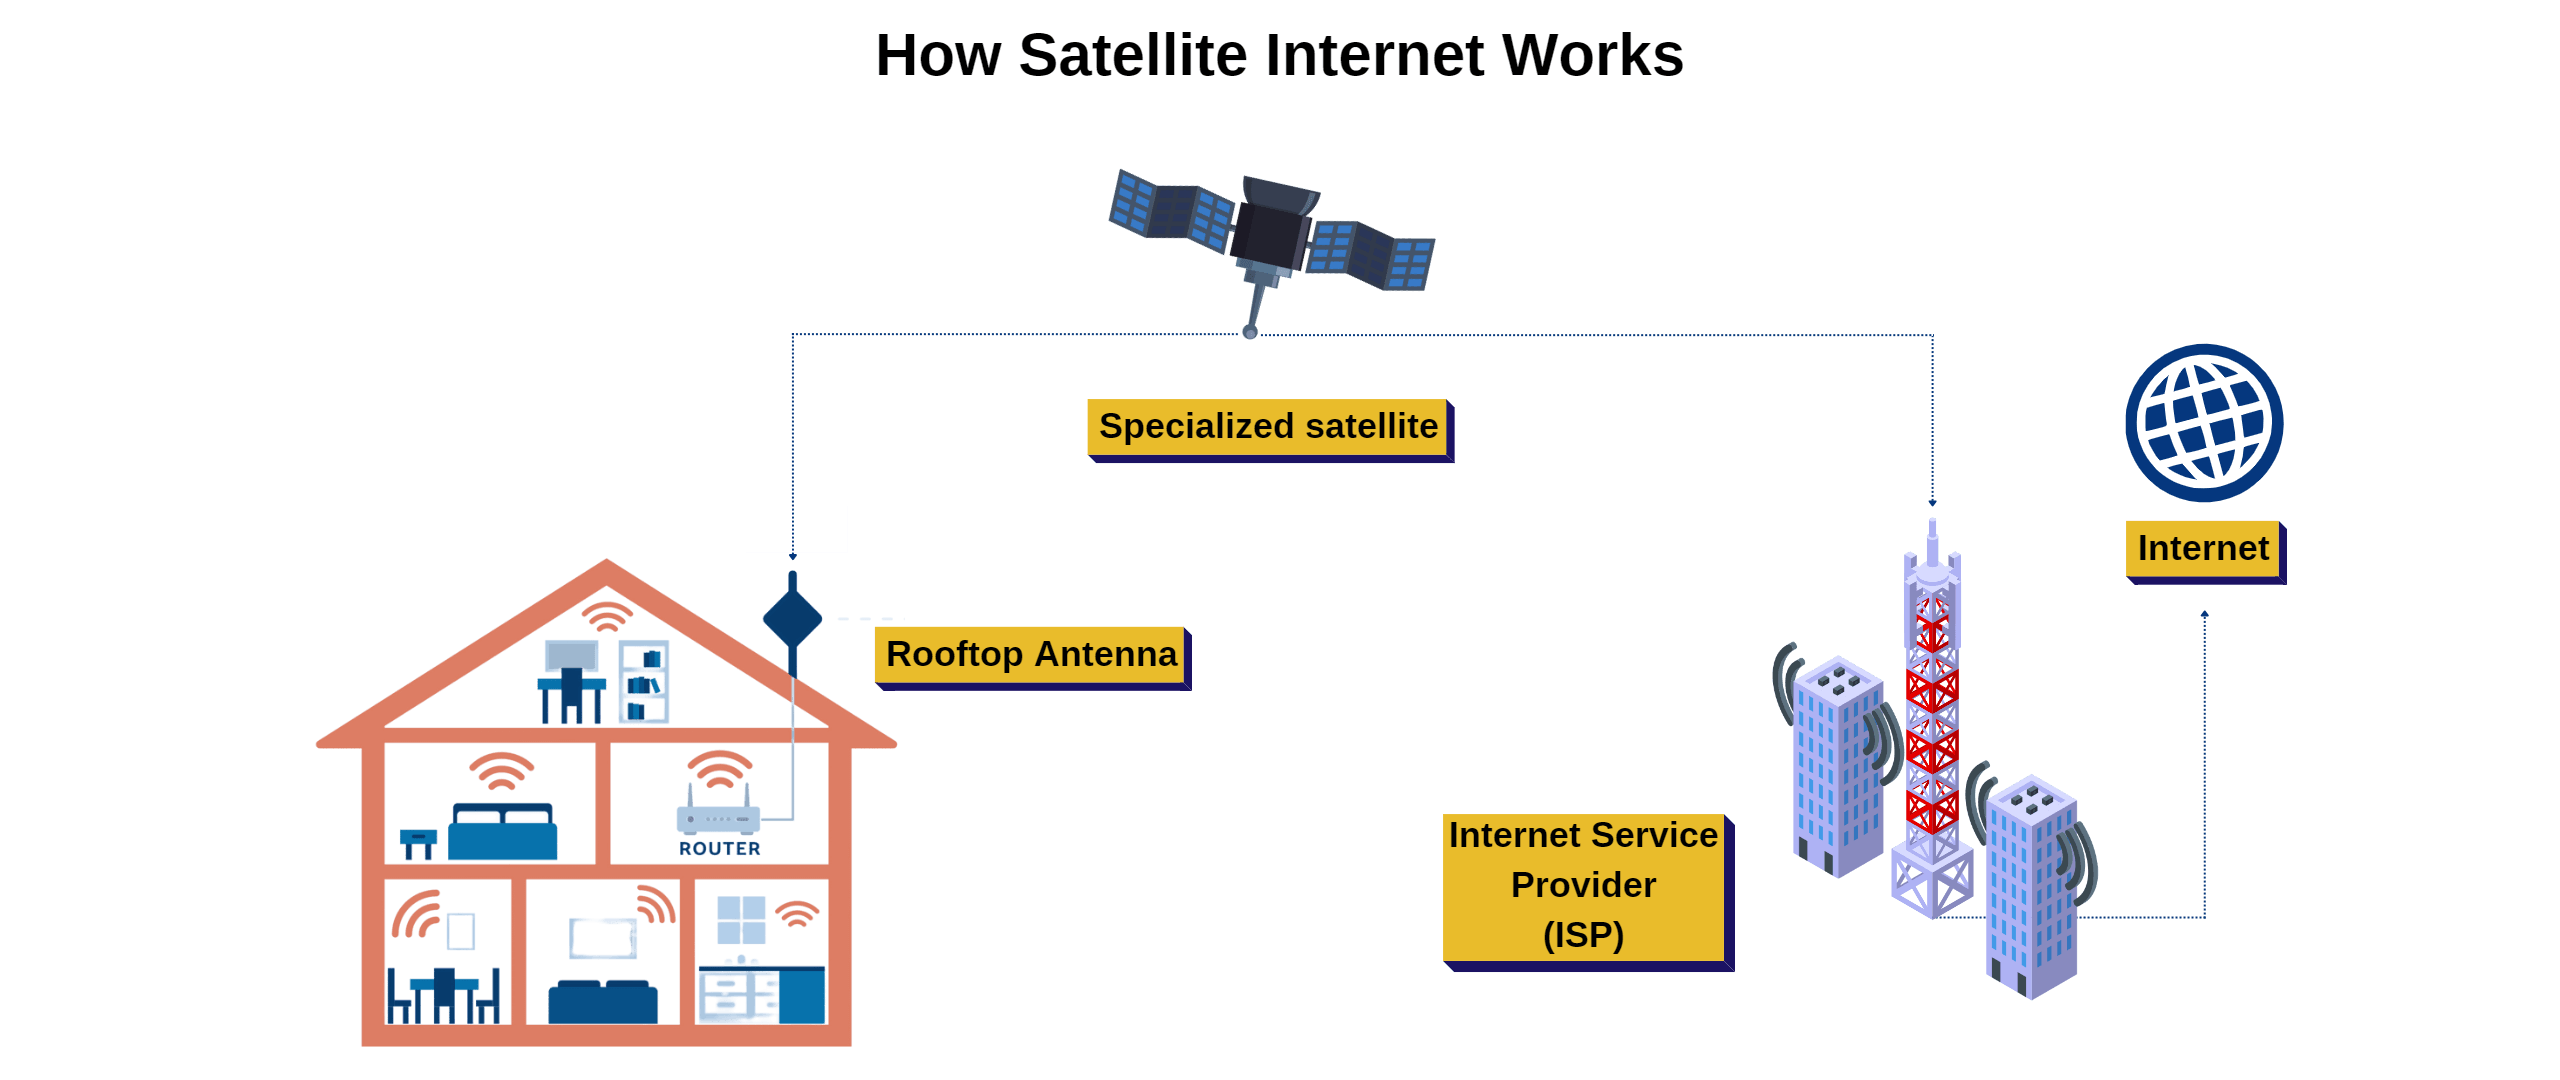 Guide To Locating Satellite Internet Providers By Zip Code